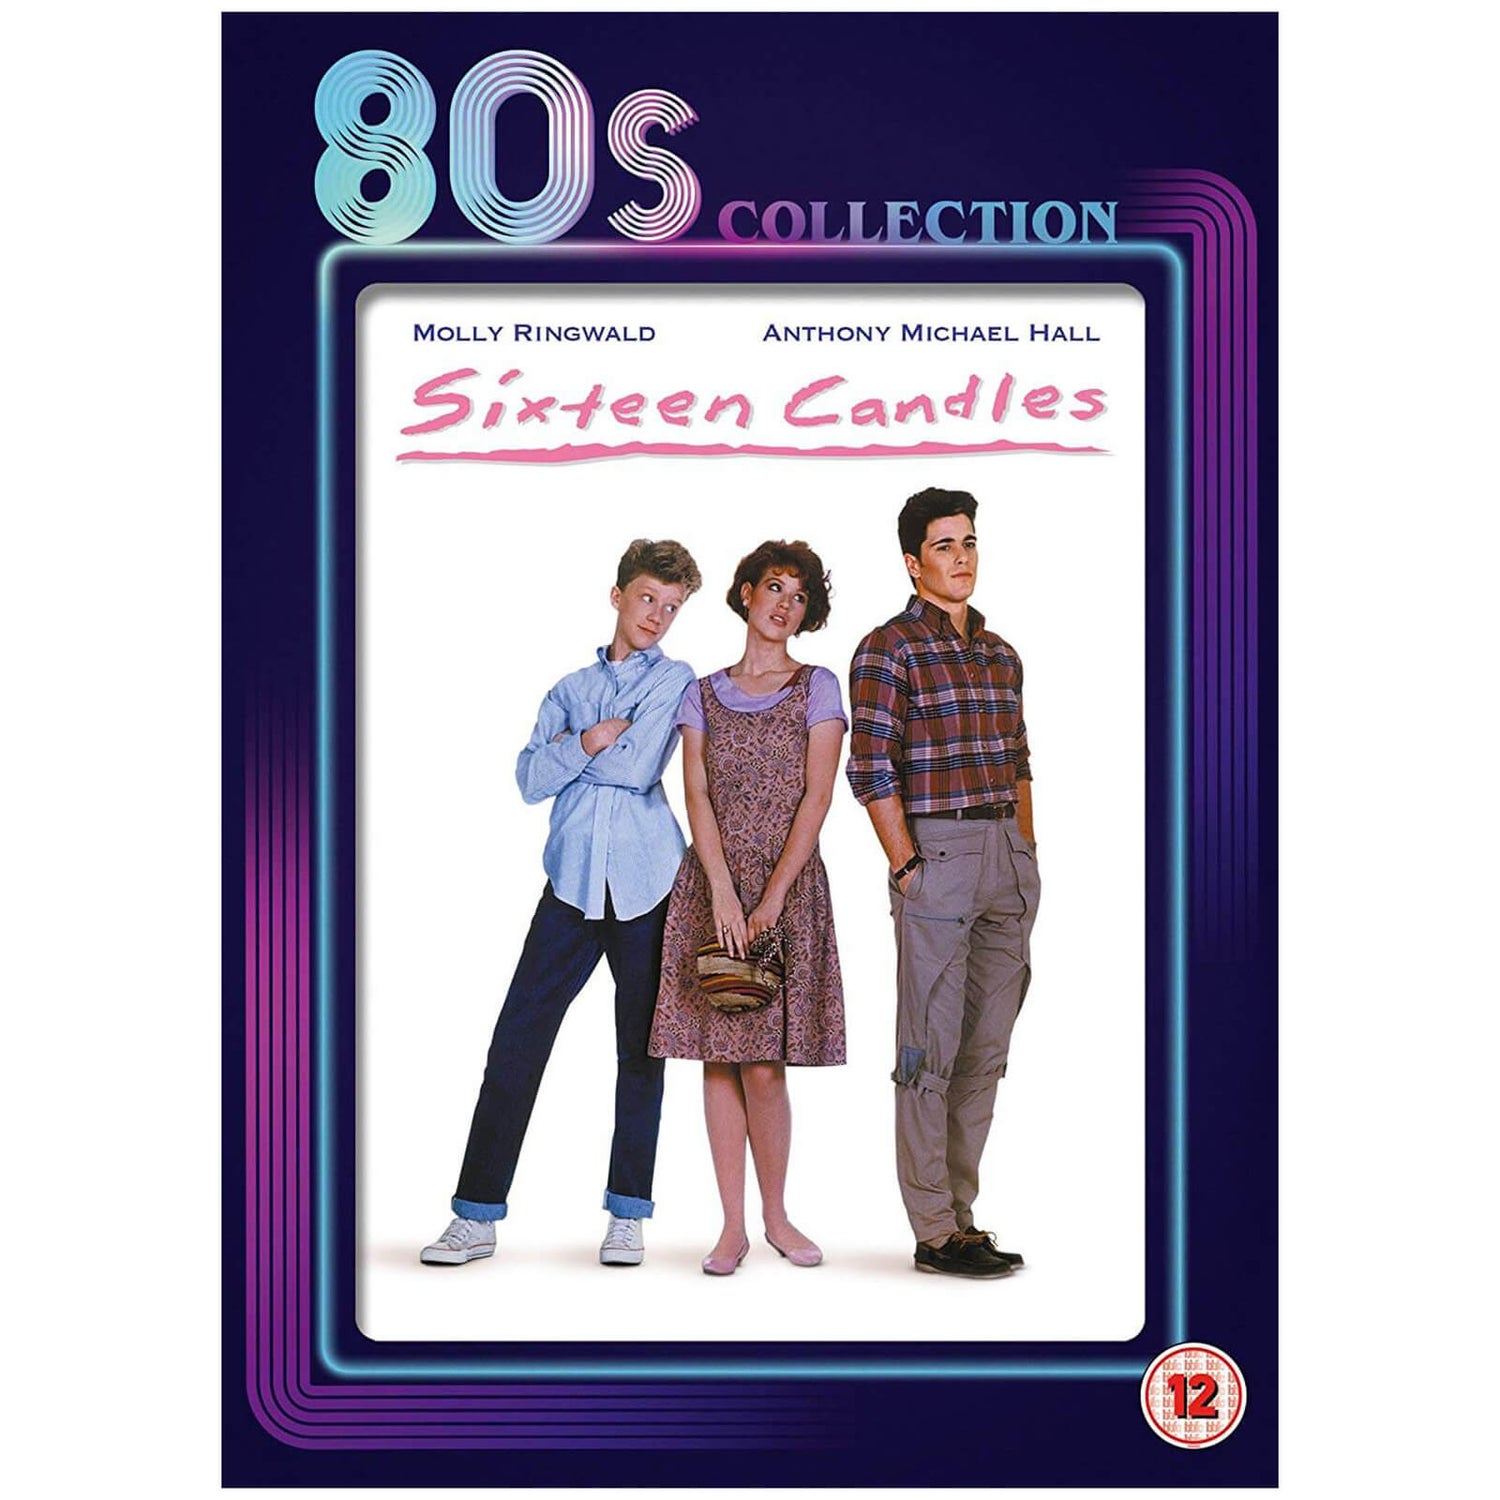 Sixteen Candles - 80s Collection